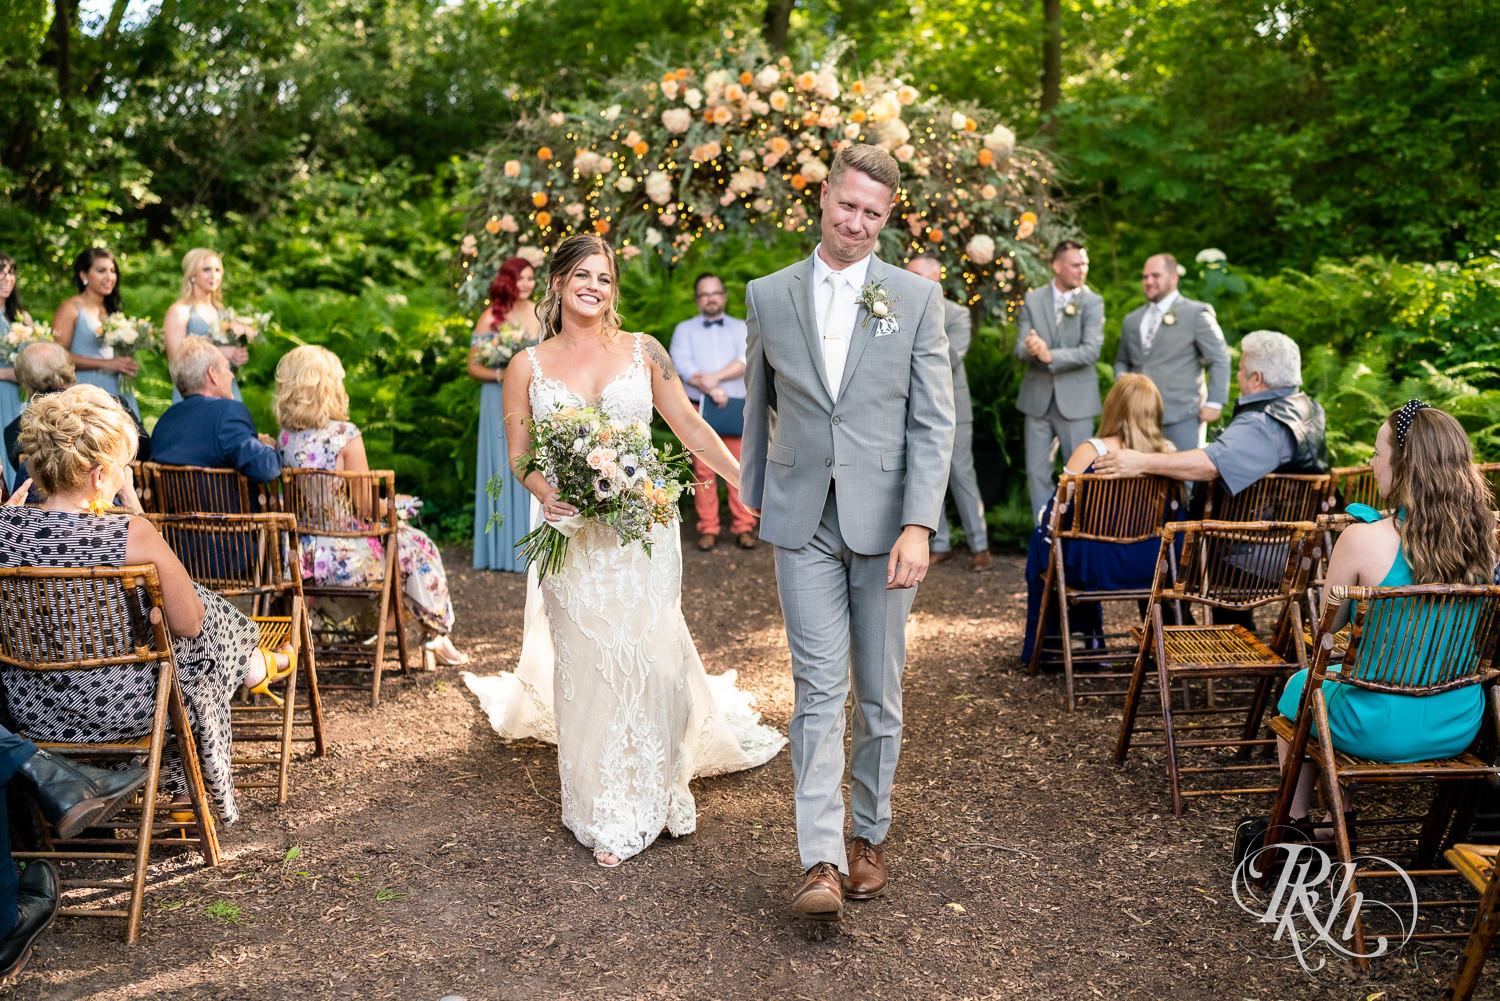 Bride and groom walking down aisle after wedding ceremony at Camrose Hill Flower Farm in Stillwater, Minnesota.